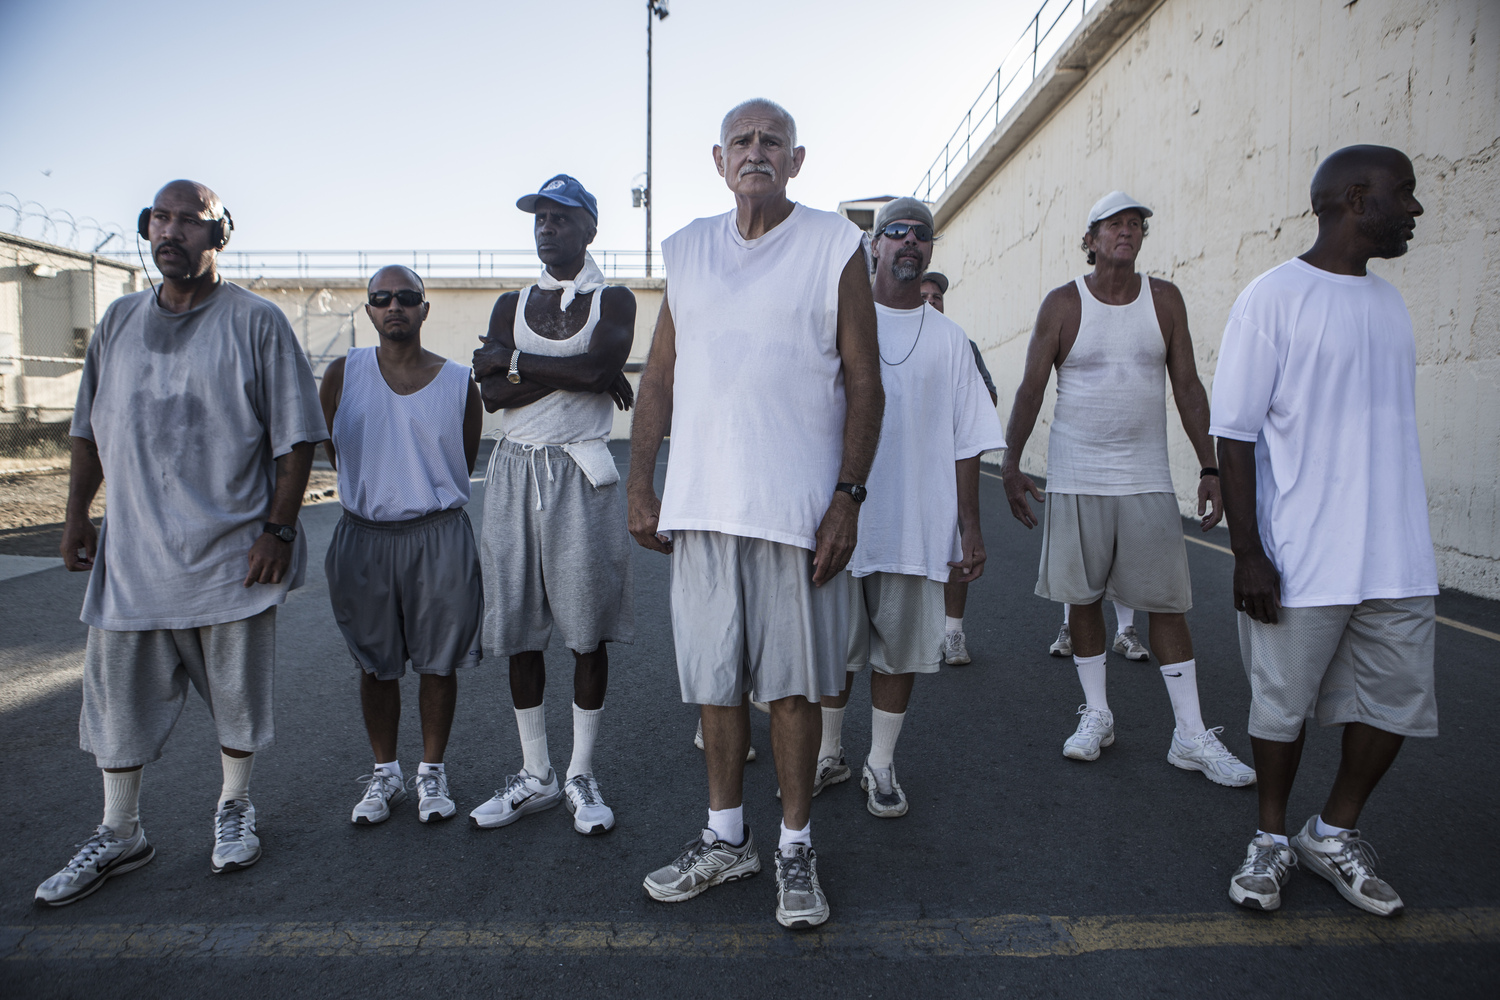 Members of the 1000 Mile Club at San Quentin State Prison with Larry Ford, center. JONATH MATHEW/© SAN QUENTIN MARATHON, LLC